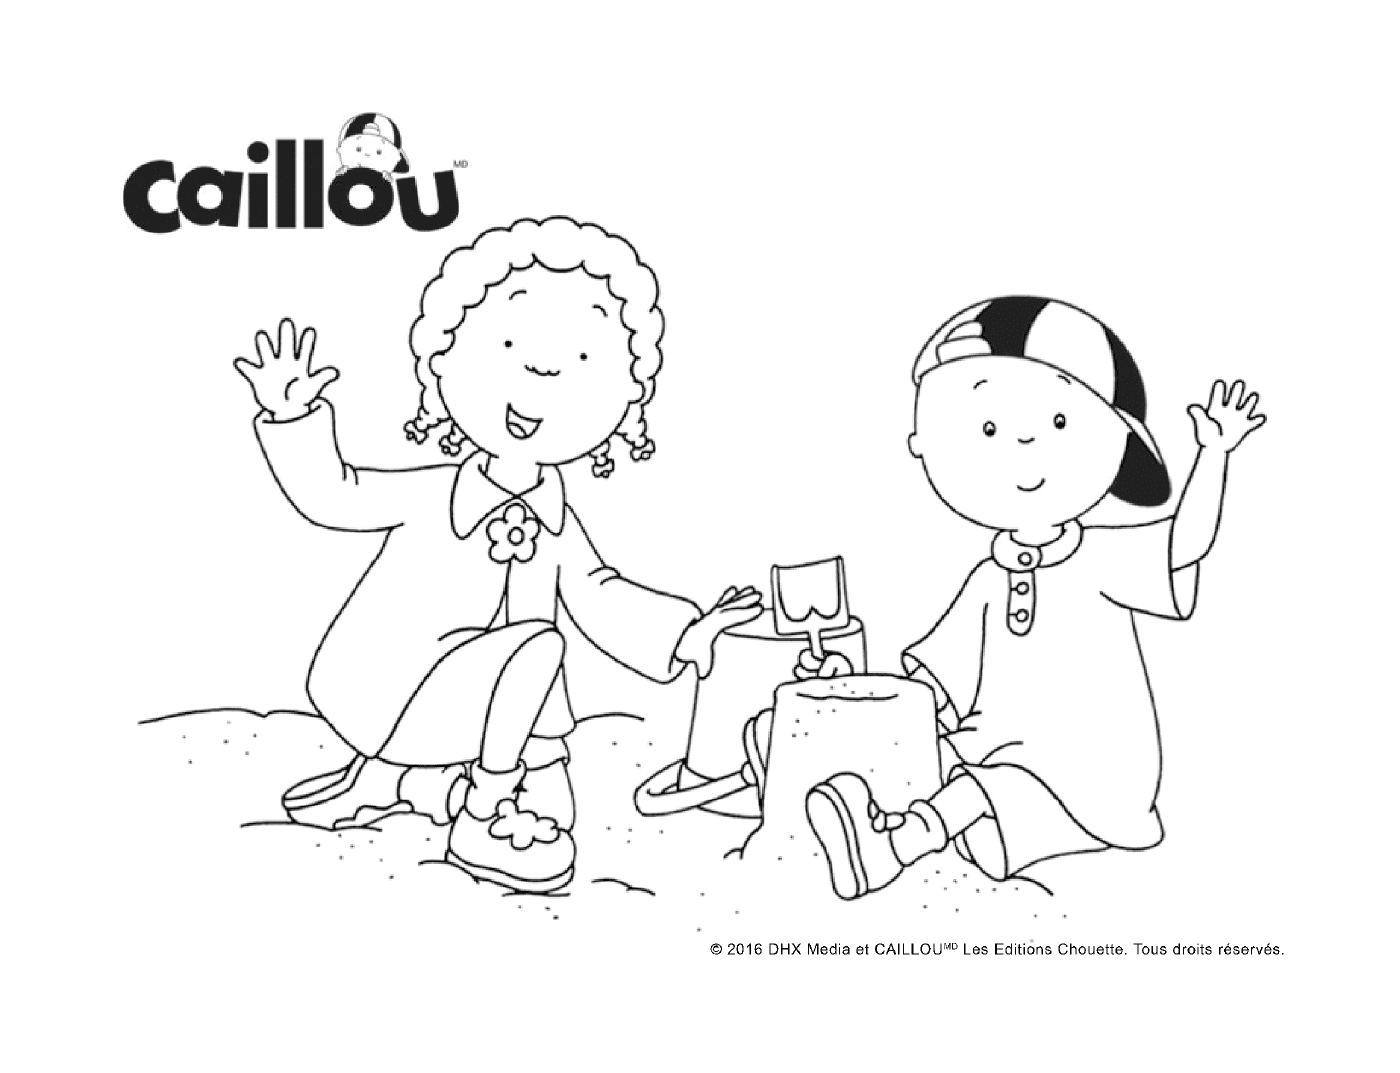  International Day of Friendship with Caillou and Clementine 